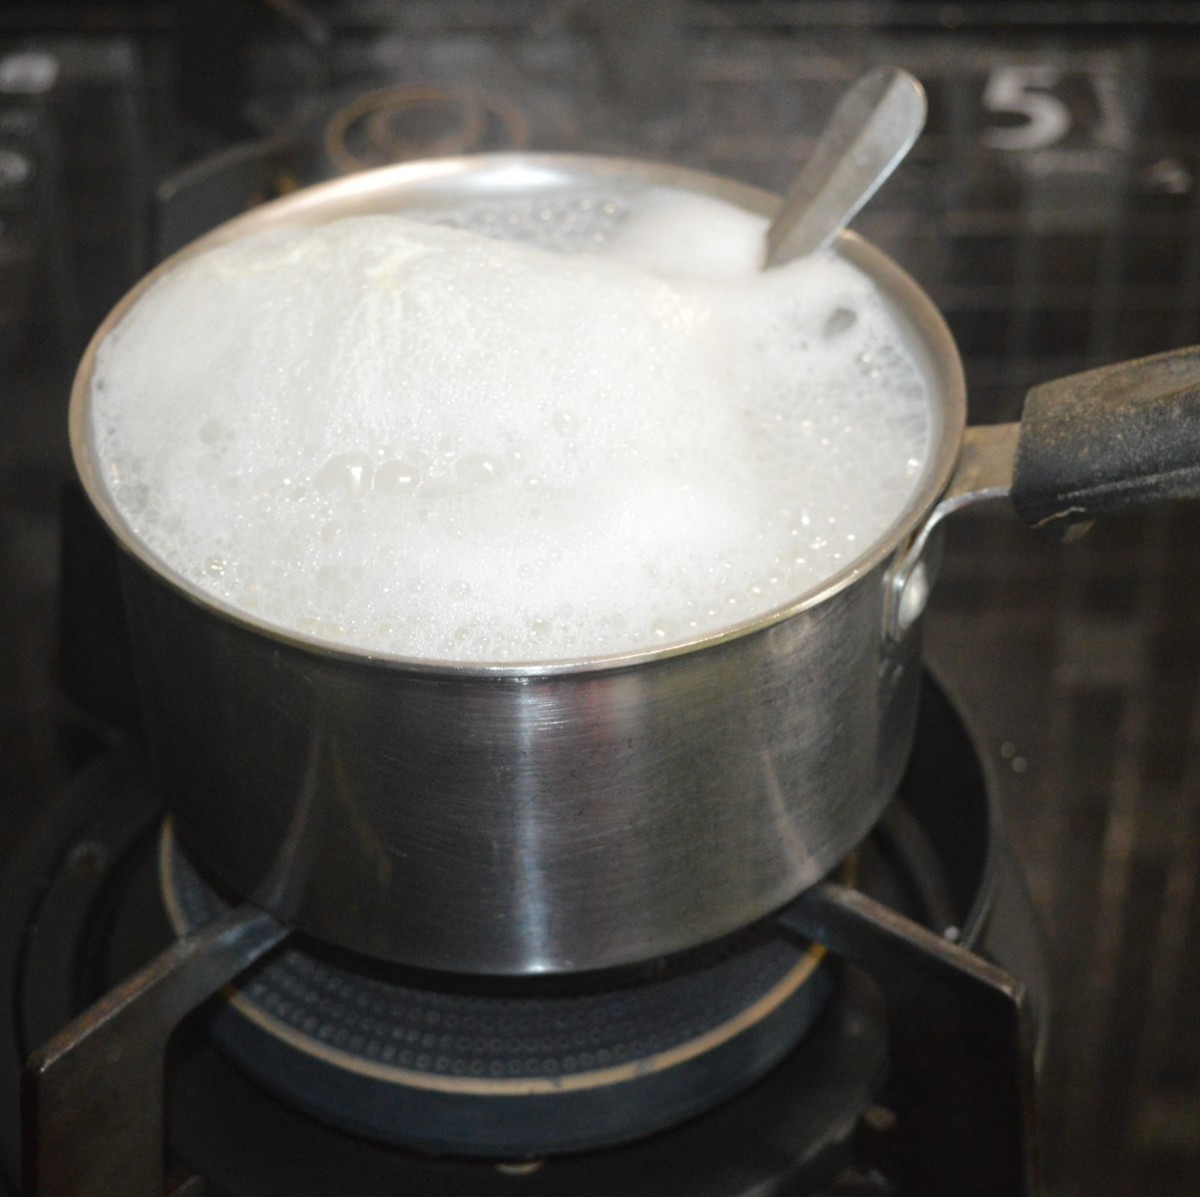 Step two: Add the milk to a saucepan. Boil until it reduces to three-quarters of the original volume.